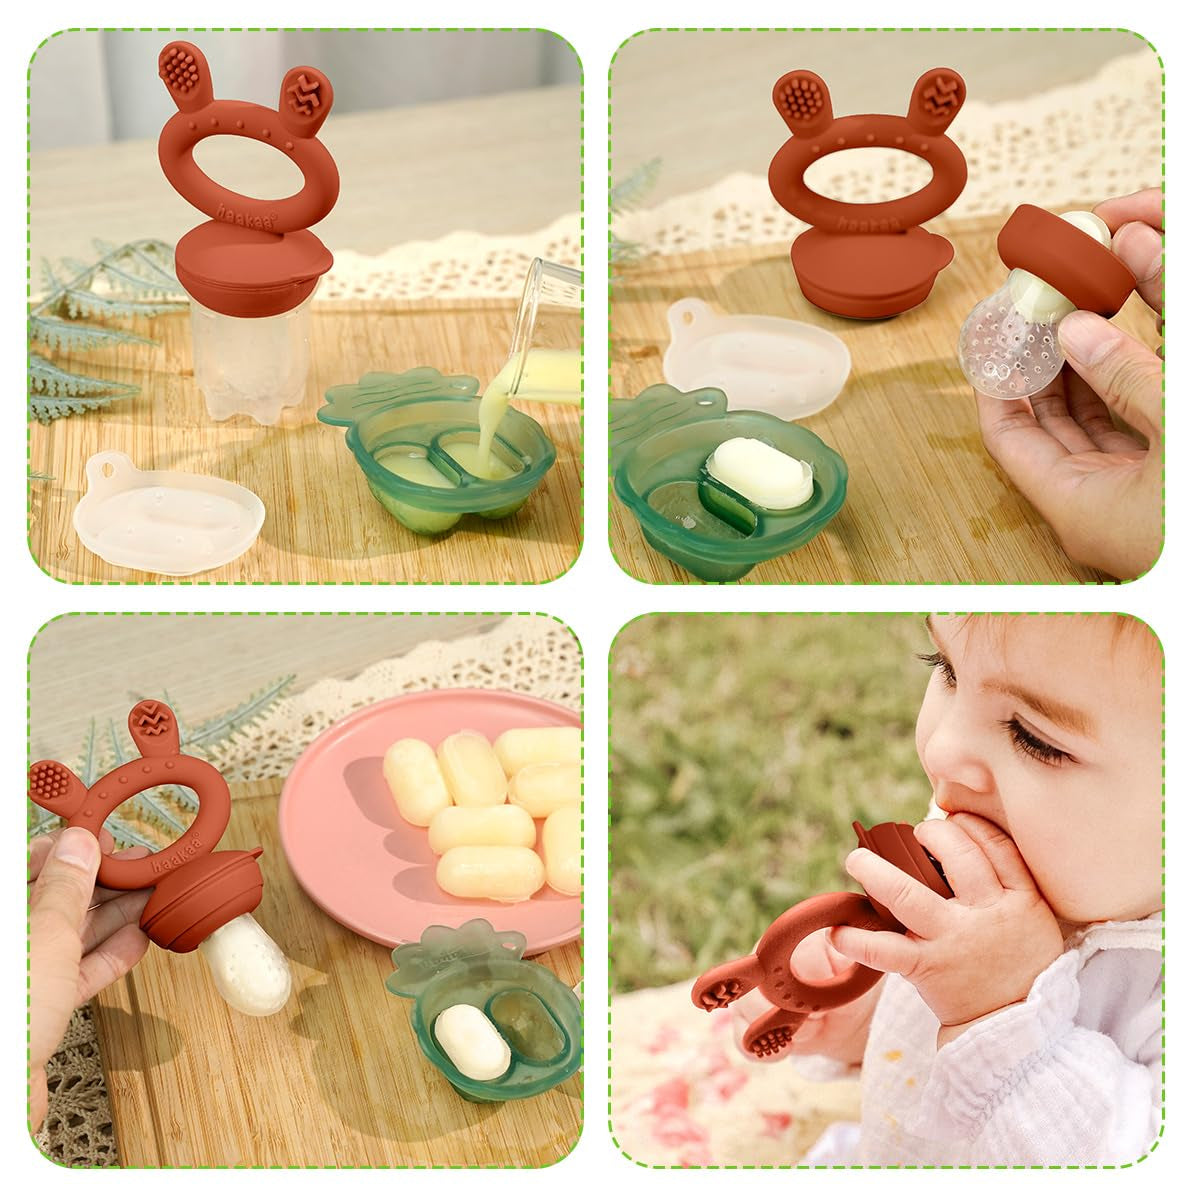 "Deluxe Baby Fruit Feeder & Mini Freezer Nibble Tray Combo - Perfect Solution for Cooling Relief and Self-Feeding! Bpa-Free Silicone Feeder for Safe Infant Nutrition. Ideal for Babies 4 Months and Up! (Copper)"